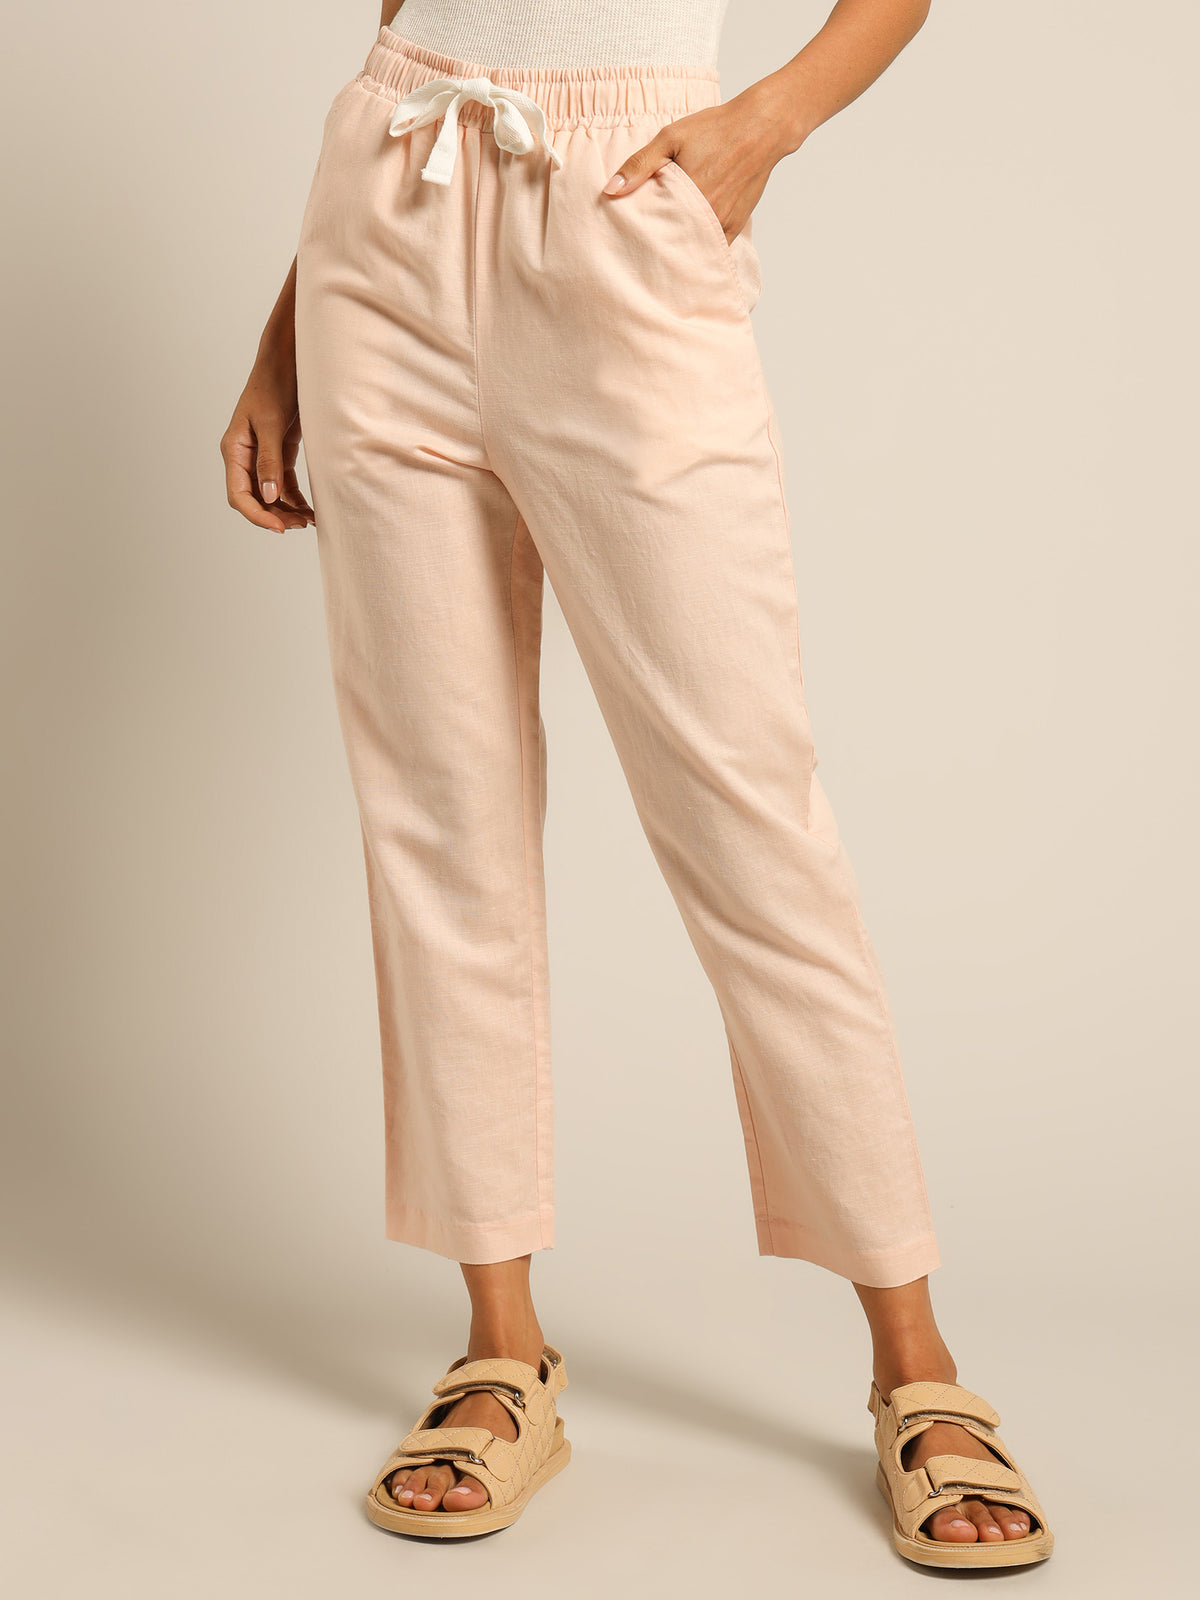 Nude Classic Pant in Mineral Pink